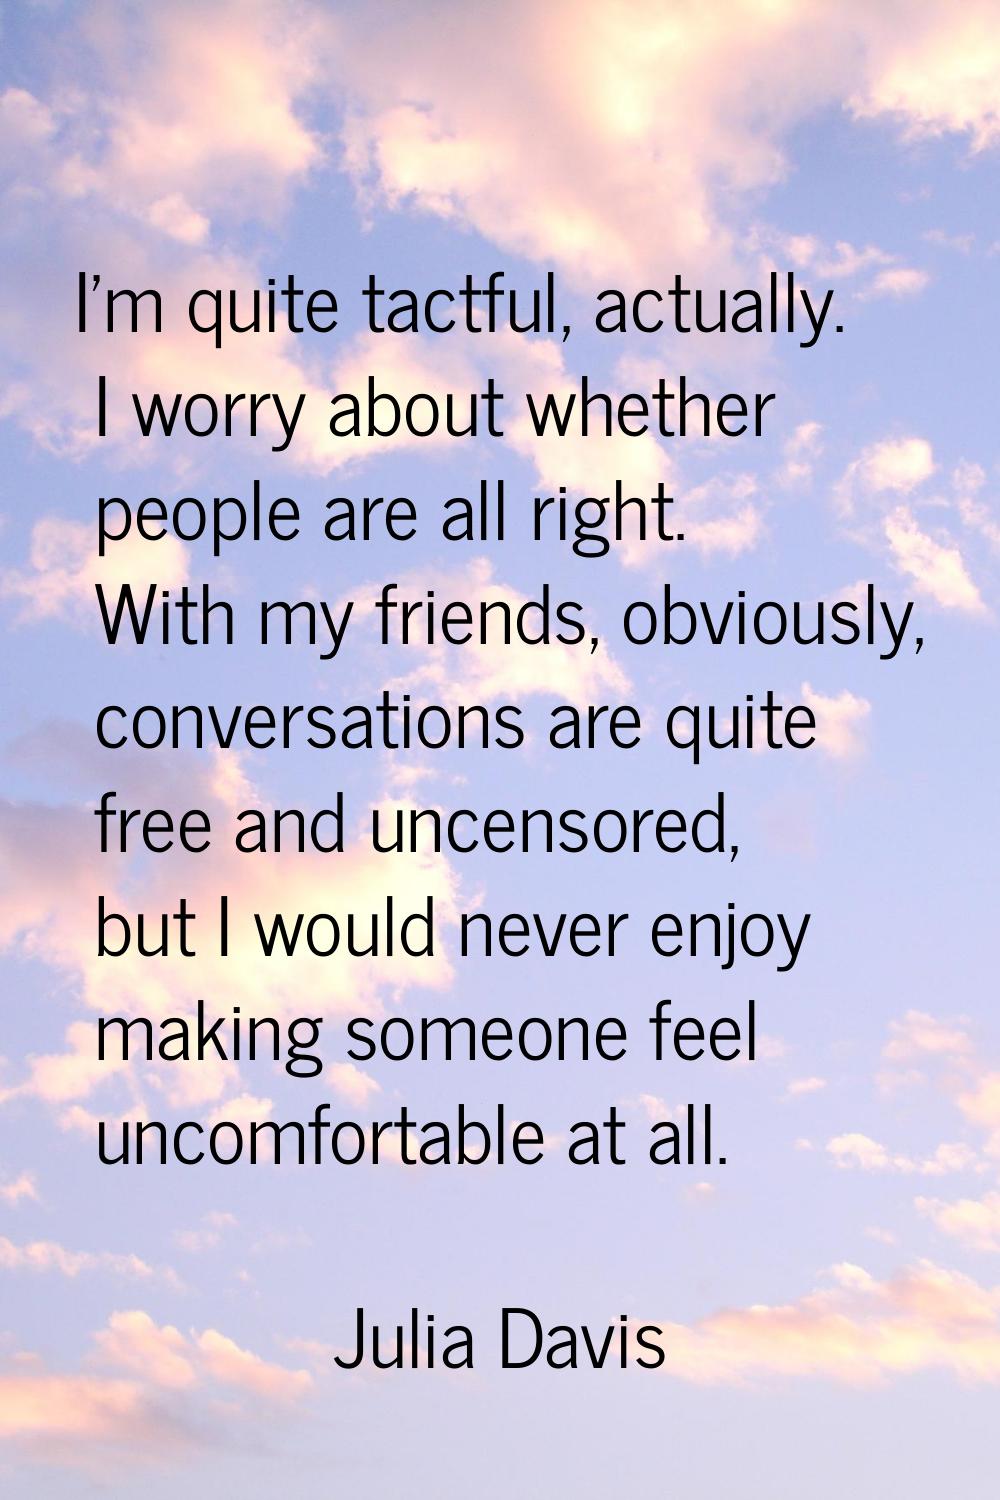 I'm quite tactful, actually. I worry about whether people are all right. With my friends, obviously